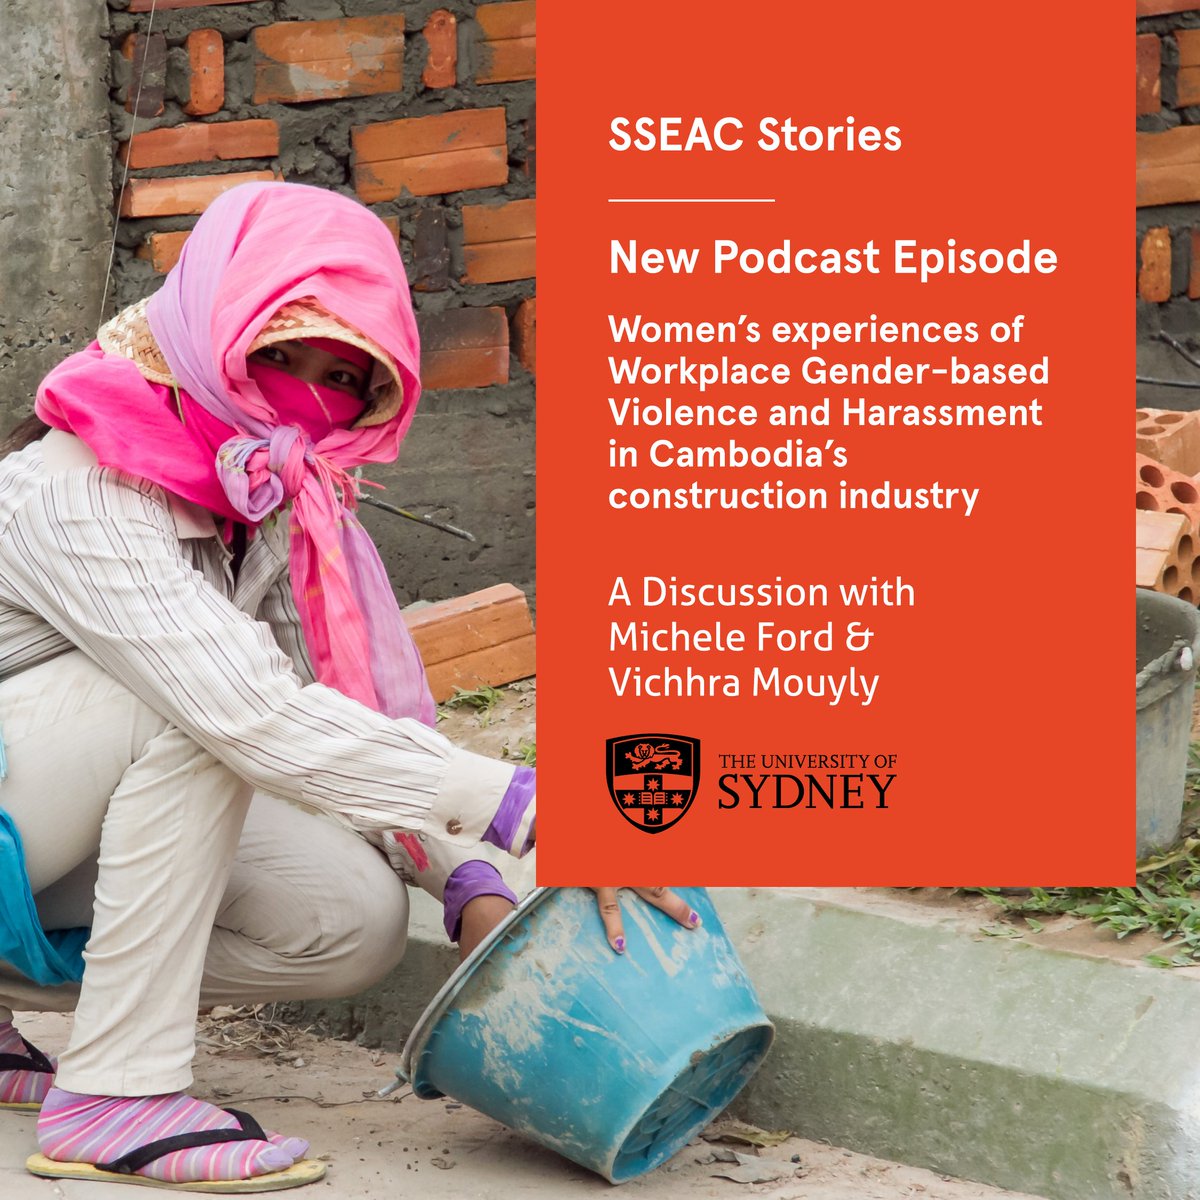 📢🎧🇰🇭 New podcast alert: Women’s Experiences of Workplace Gender-based Violence and Harassment in Cambodia’s Construction Industry bit.ly/sseacstories #Cambodia #construction #GBVH #SSEAC #SSEACStories